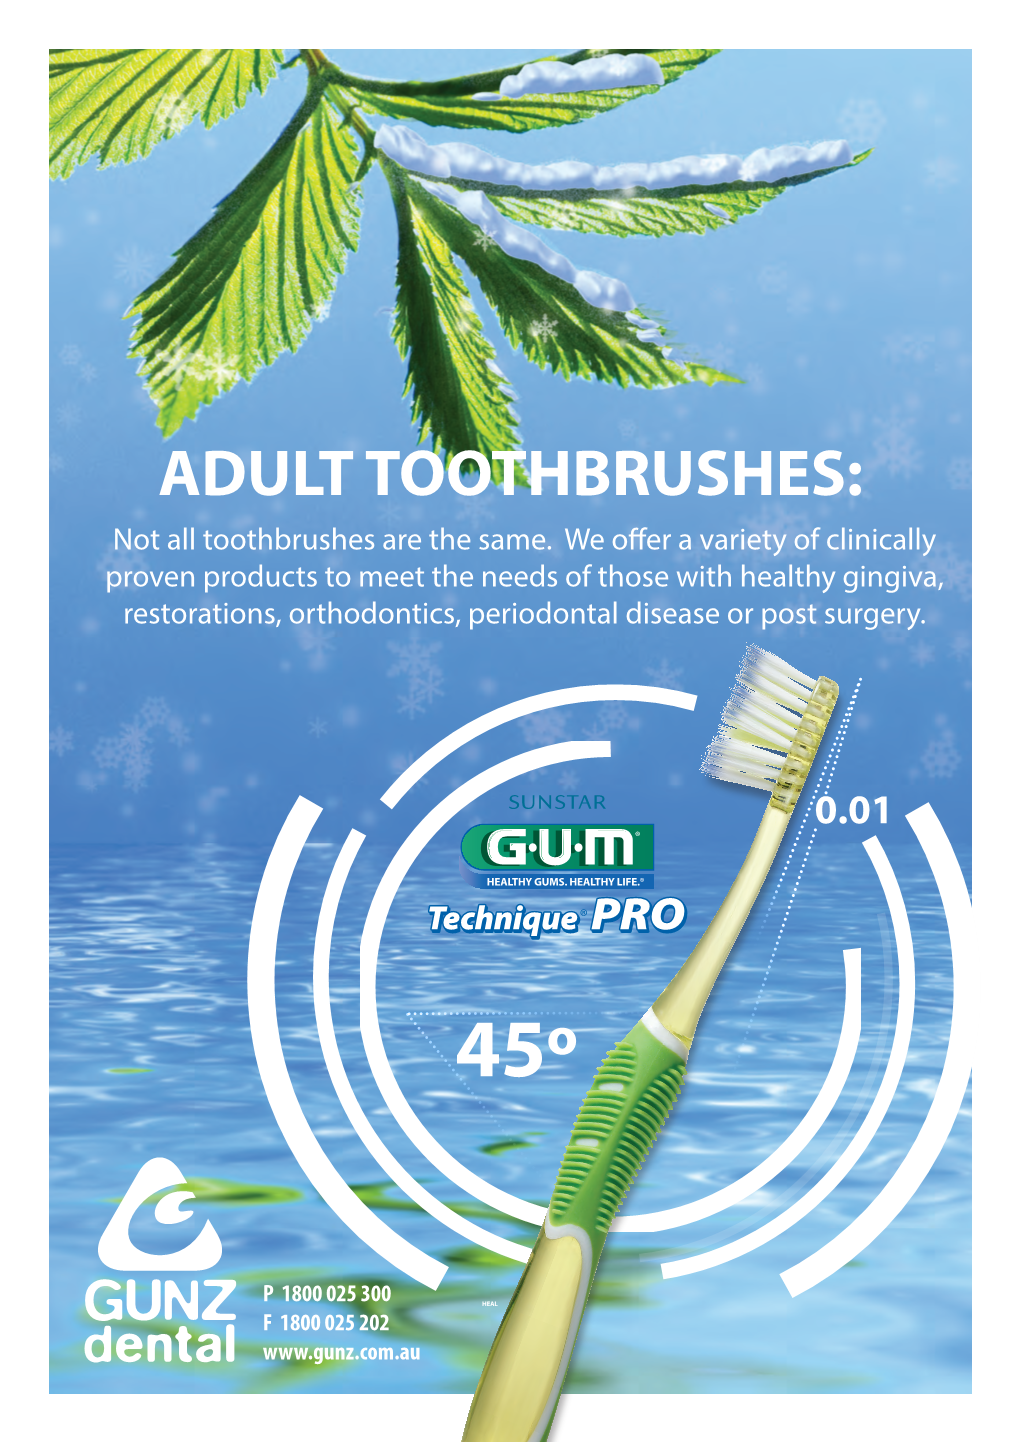 ADULT TOOTHBRUSHES: Not All Toothbrushes Are the Same